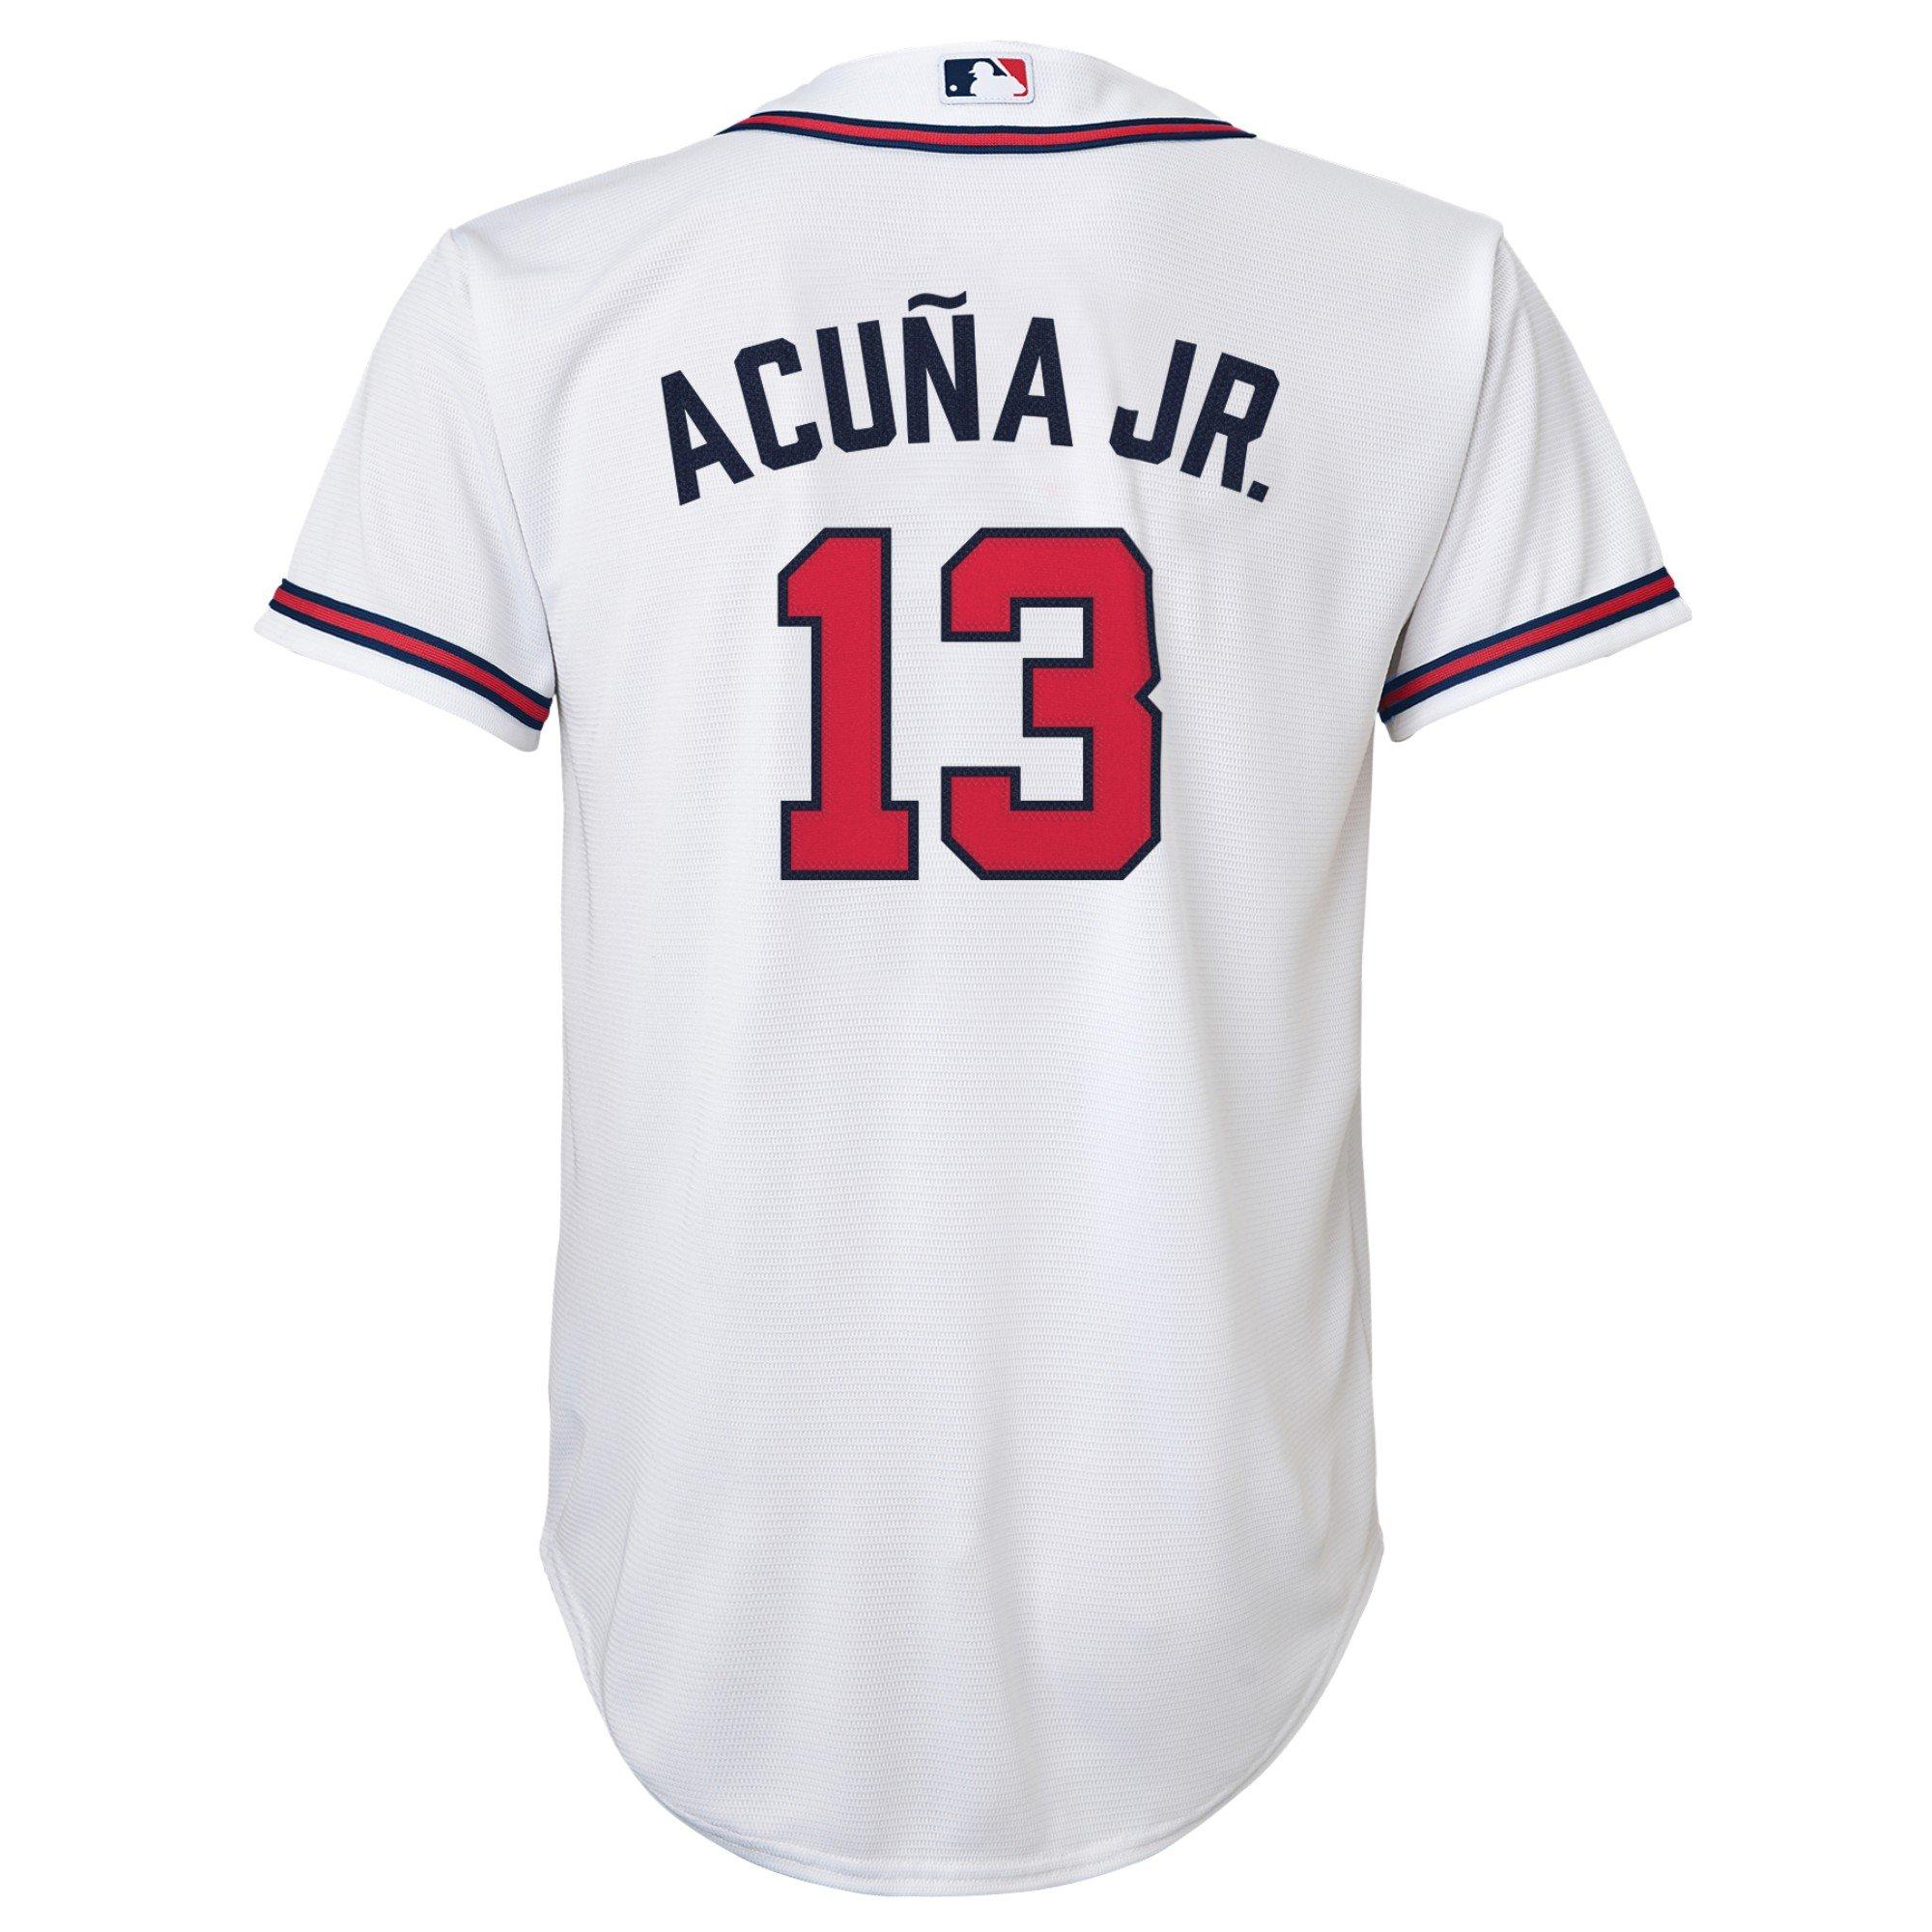 acuna jr jersey youth xl